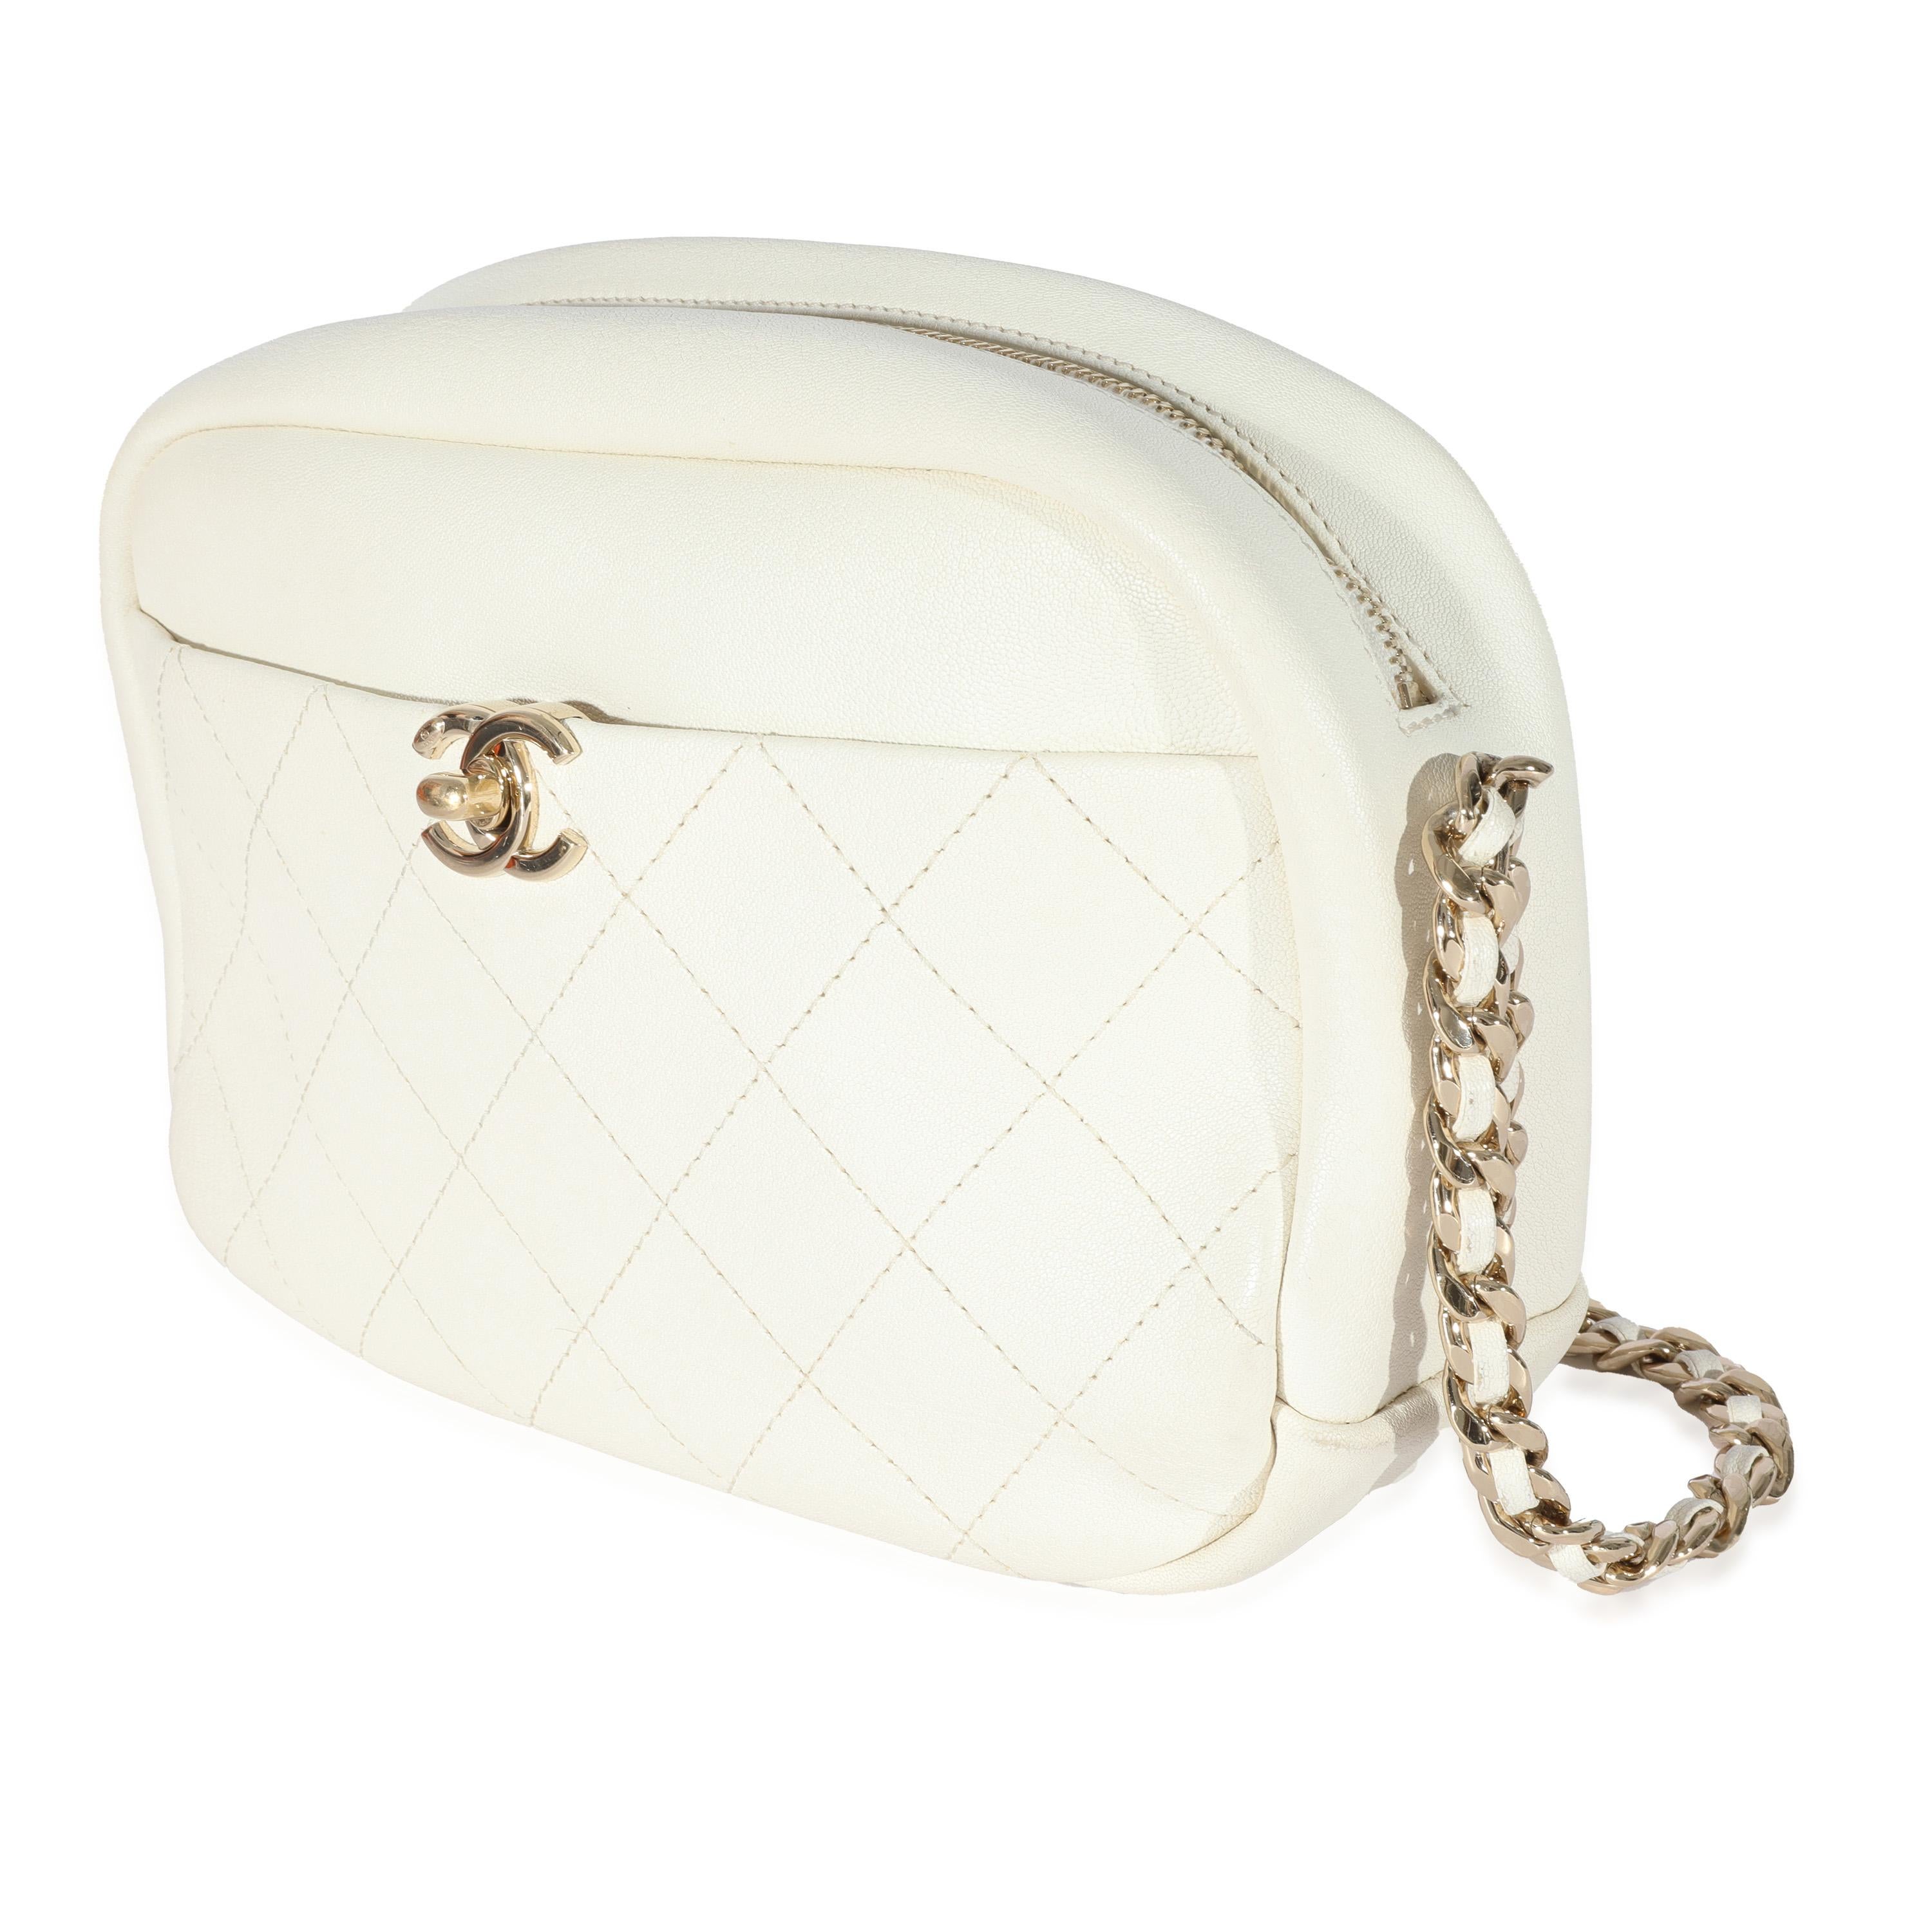 Chanel White Leather Casual Trip Camera Bag In Excellent Condition For Sale In New York, NY